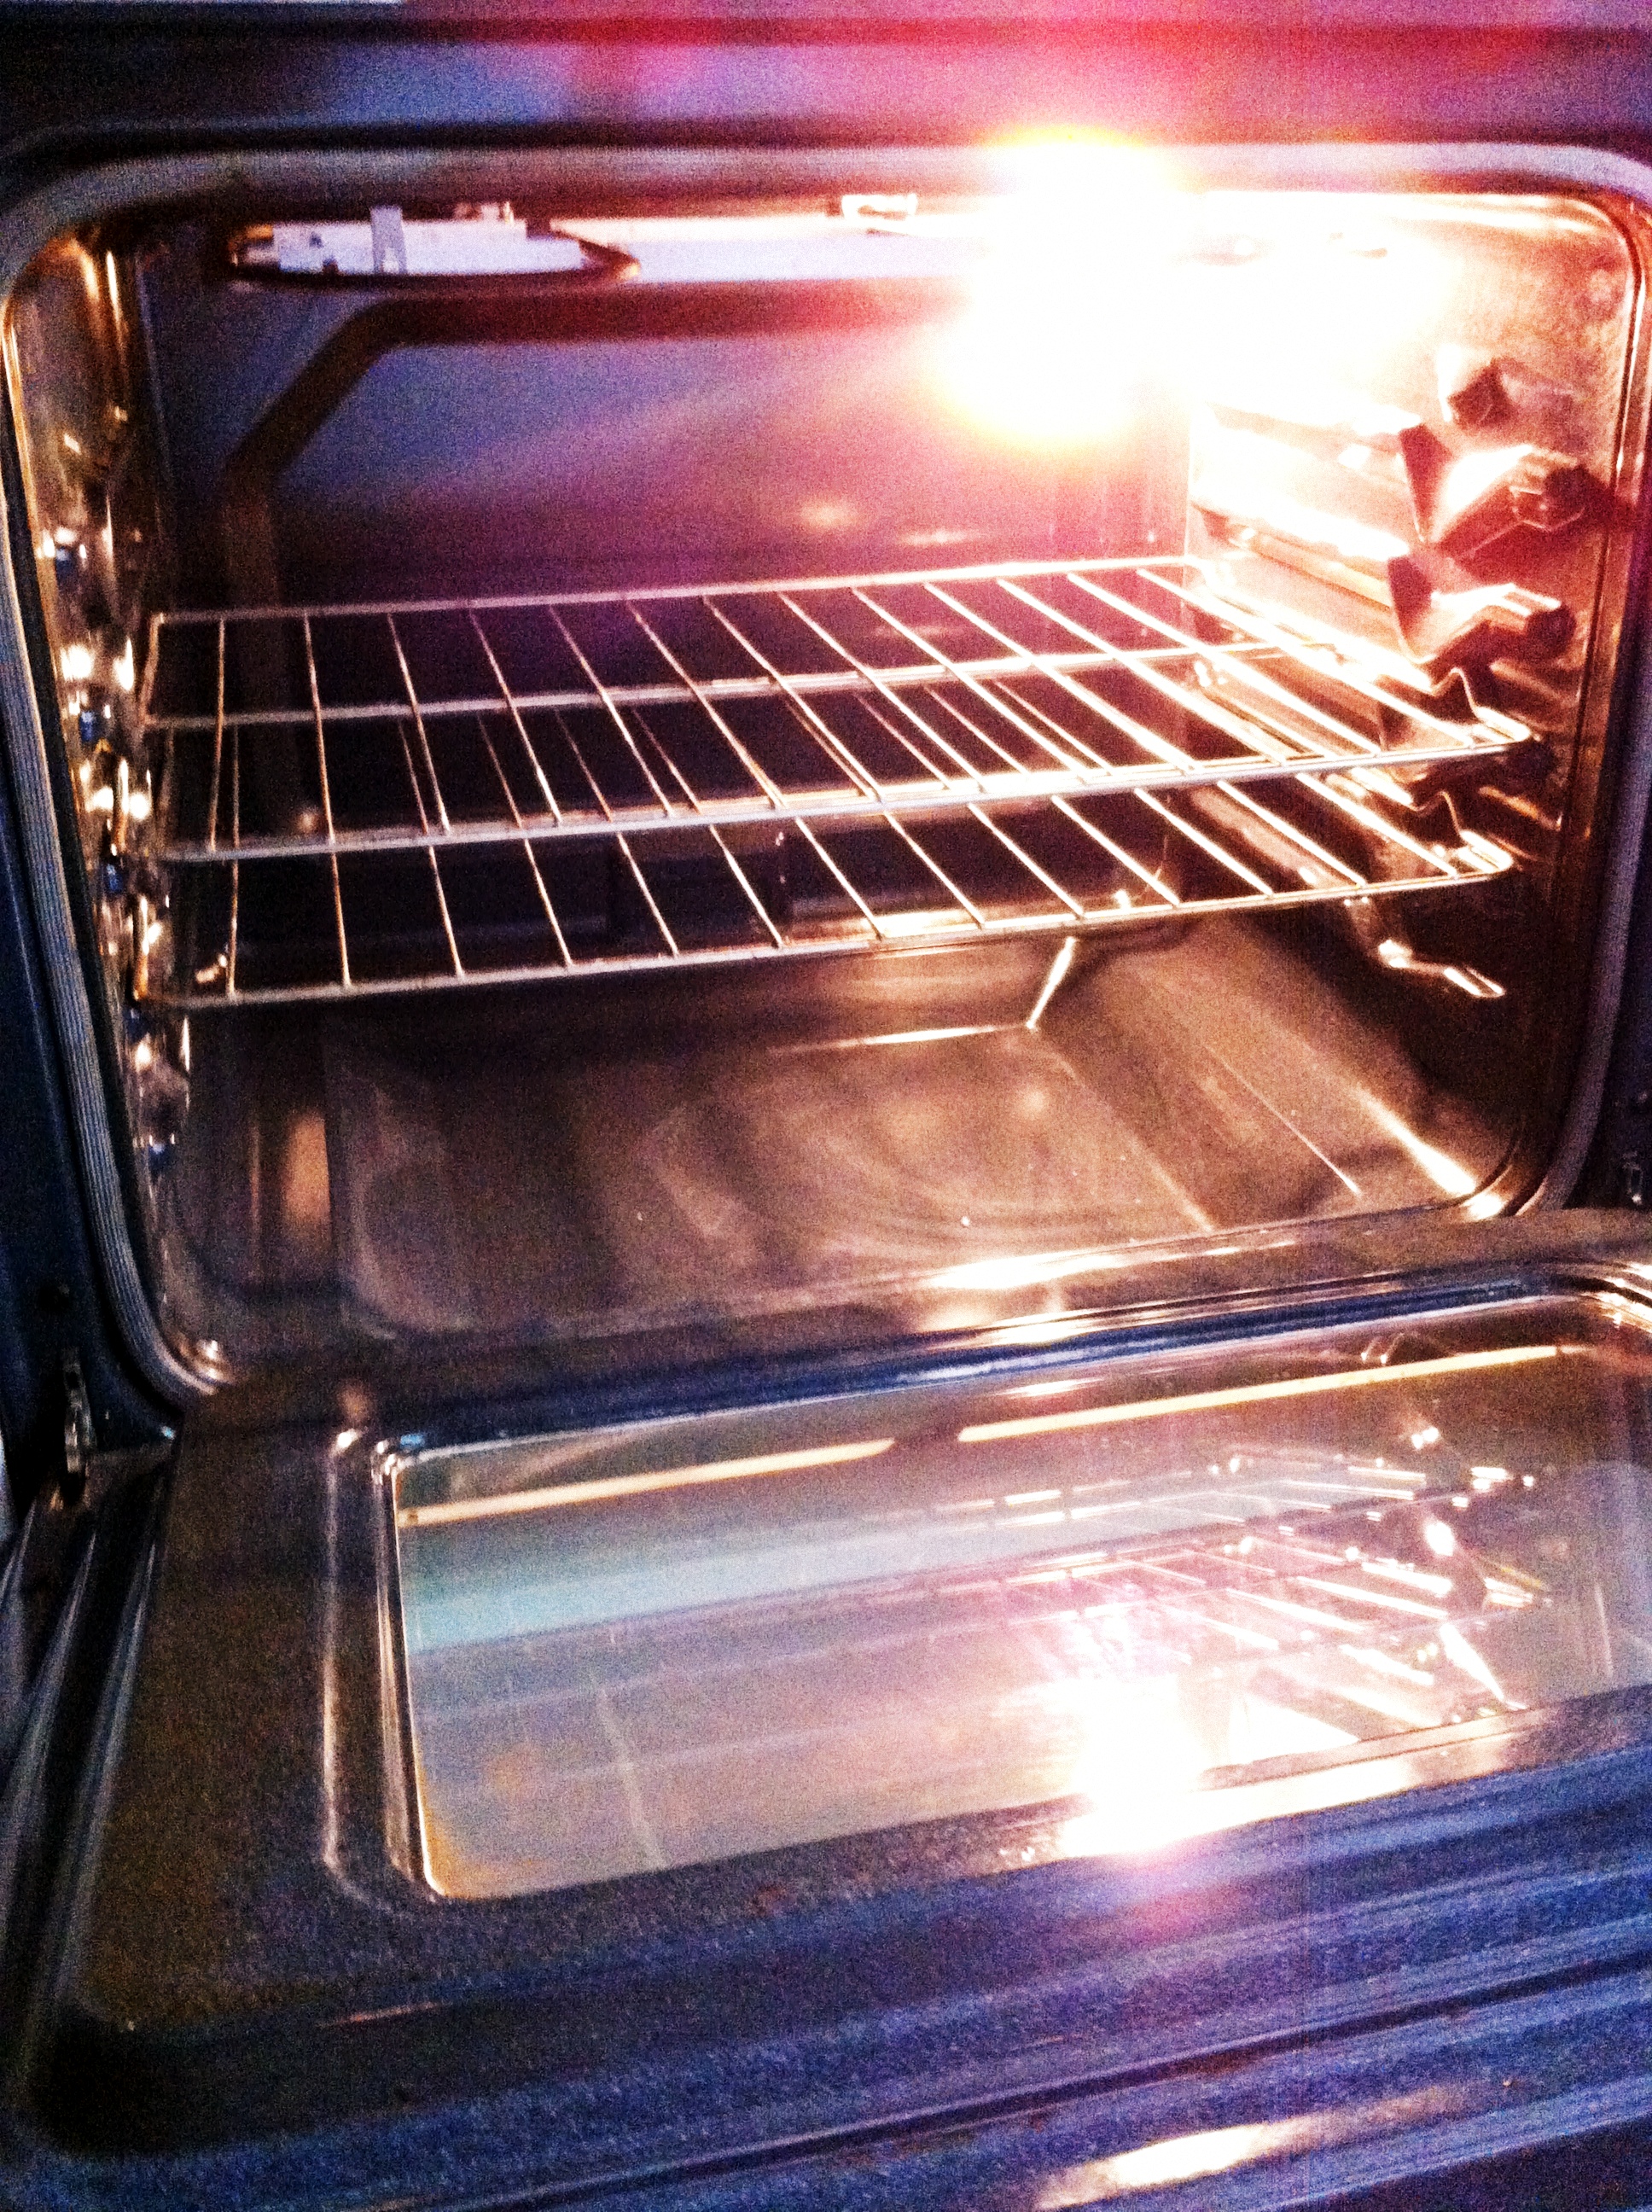 How to Clean Your Oven Trays